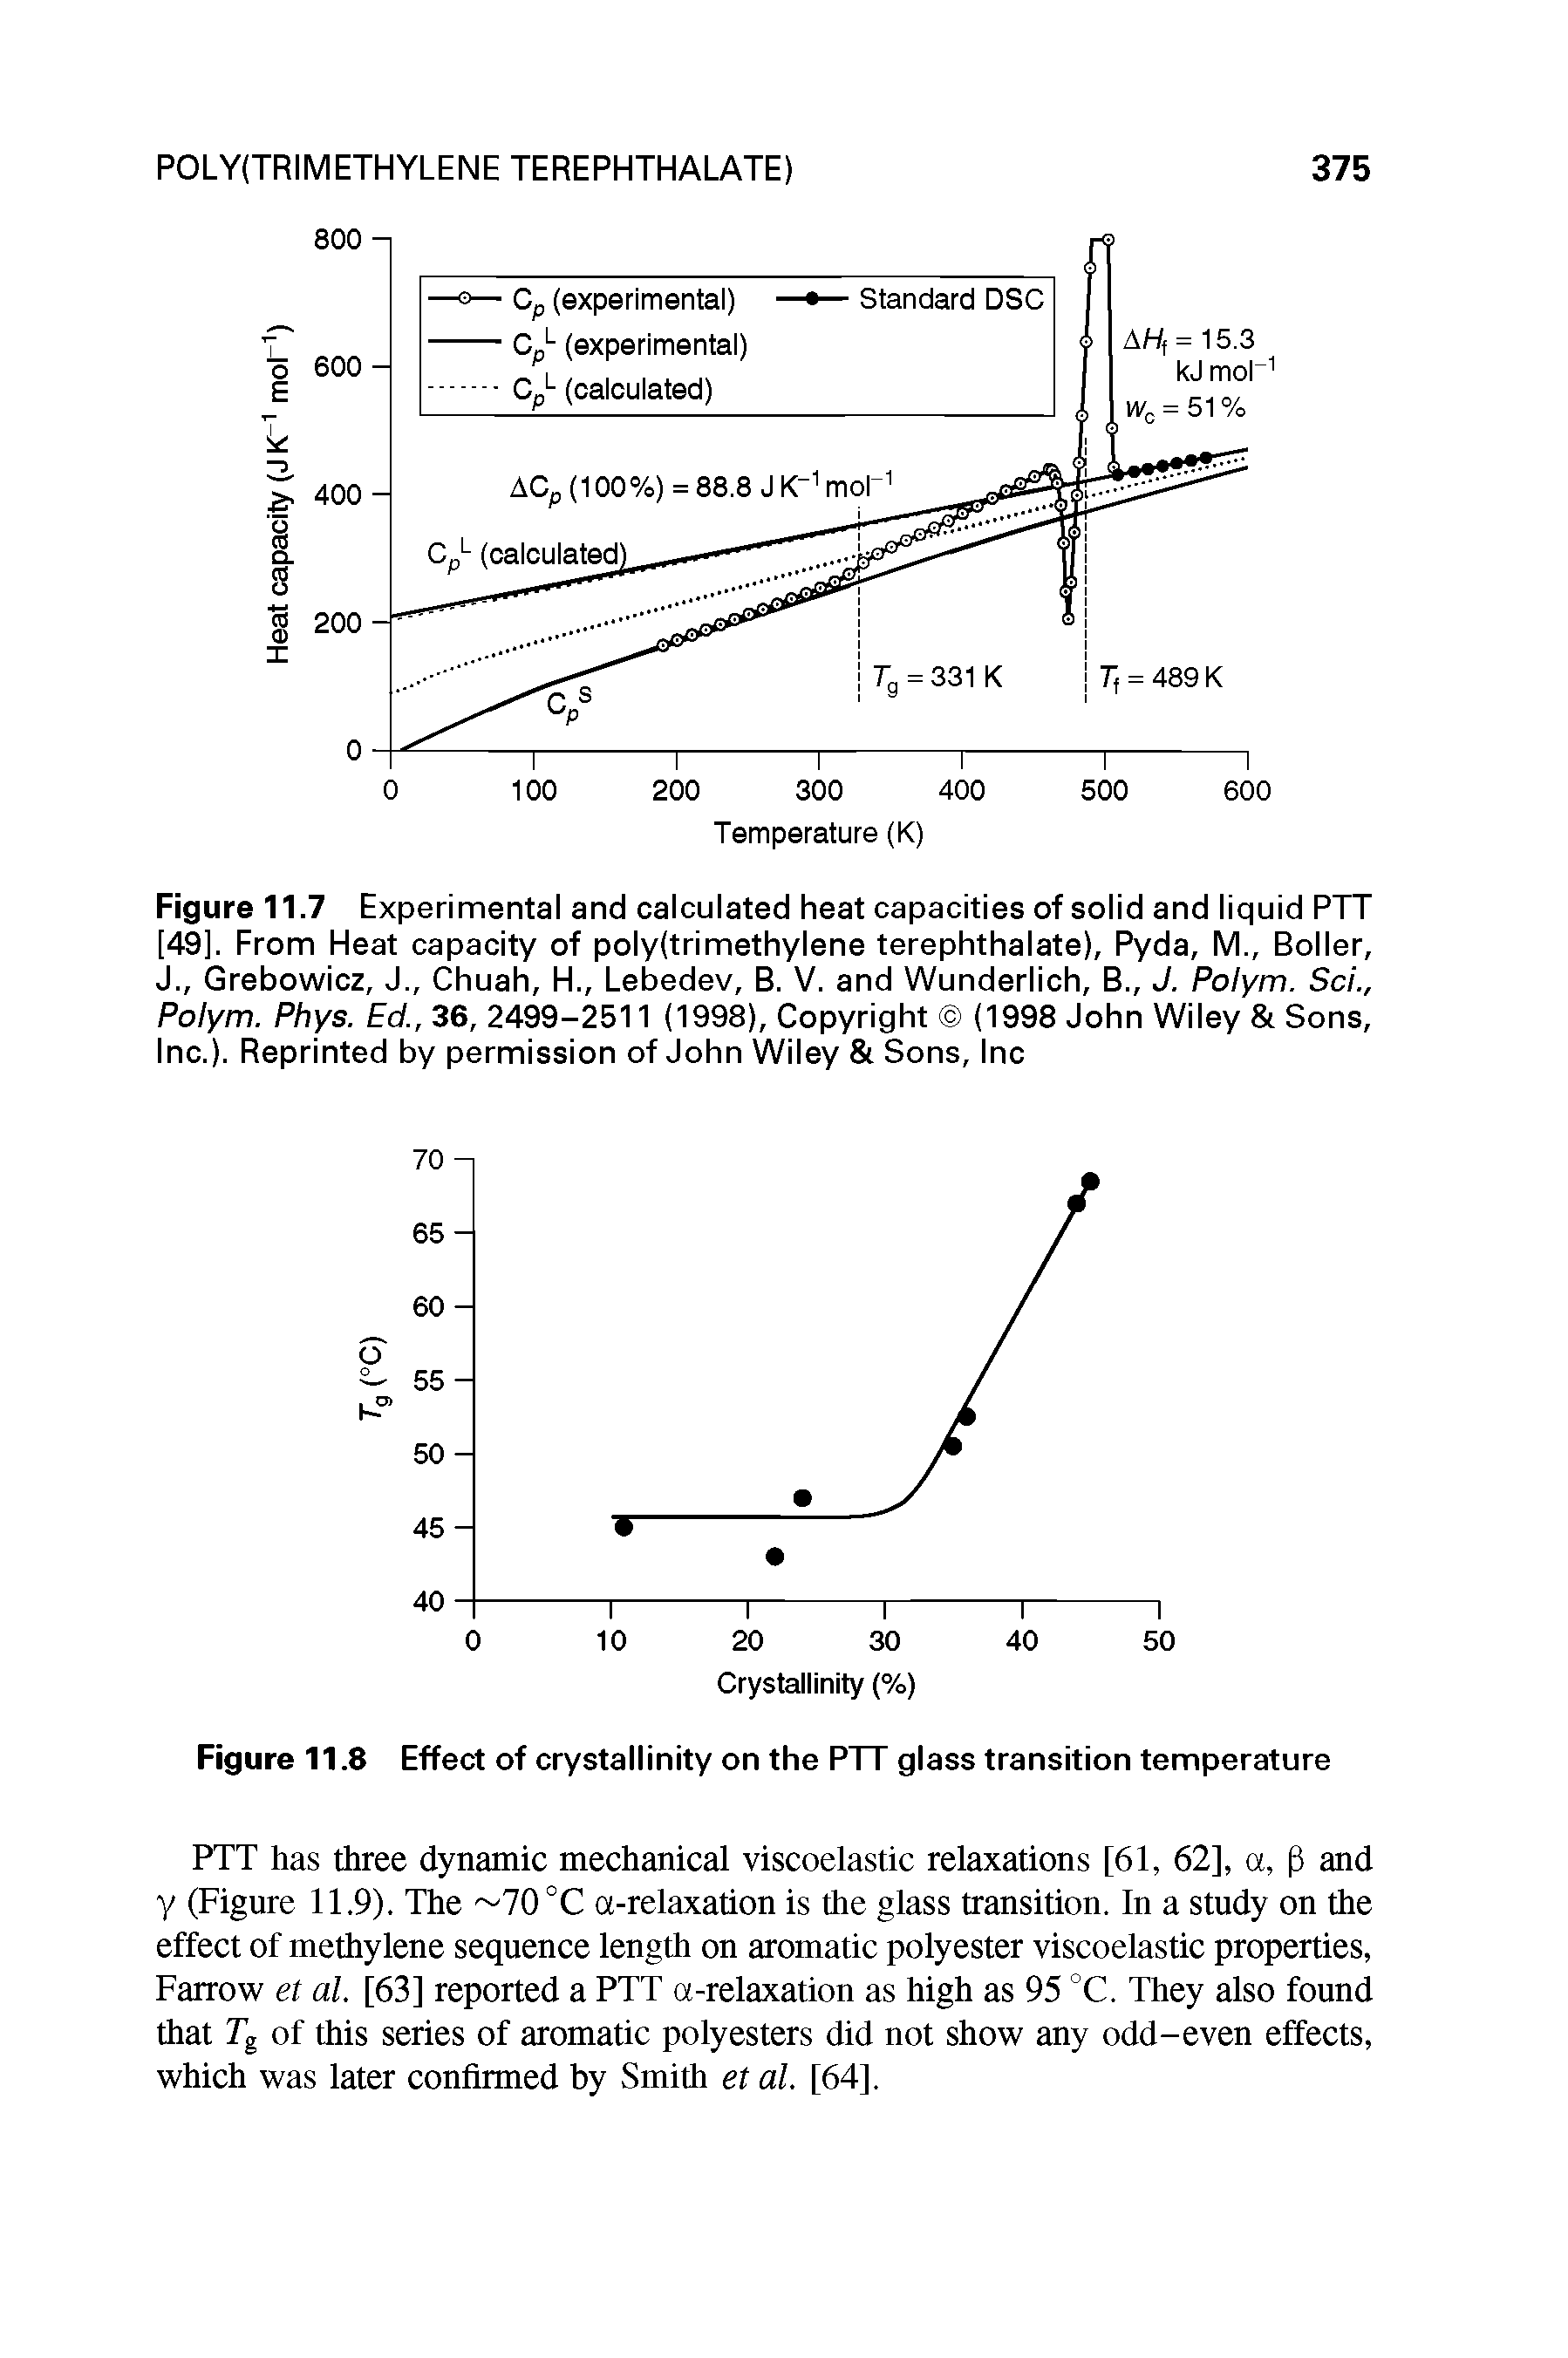 Figure 11.7 Experimental and calculated heat capacities of solid and liquid PTT [49], From Heat capacity of poly(trimethylene terephthalate), Pyda, M., Boiler, J., Grebowicz, J., Chuah, H., Lebedev, B. V. and Wunderlich, B., J. Polym. Sci., Polym. Phys. Ed., 36, 2499-2511 (1998), Copyright (1998 John Wiley Sons, Inc.). Reprinted by permission of John Wiley Sons, Inc...